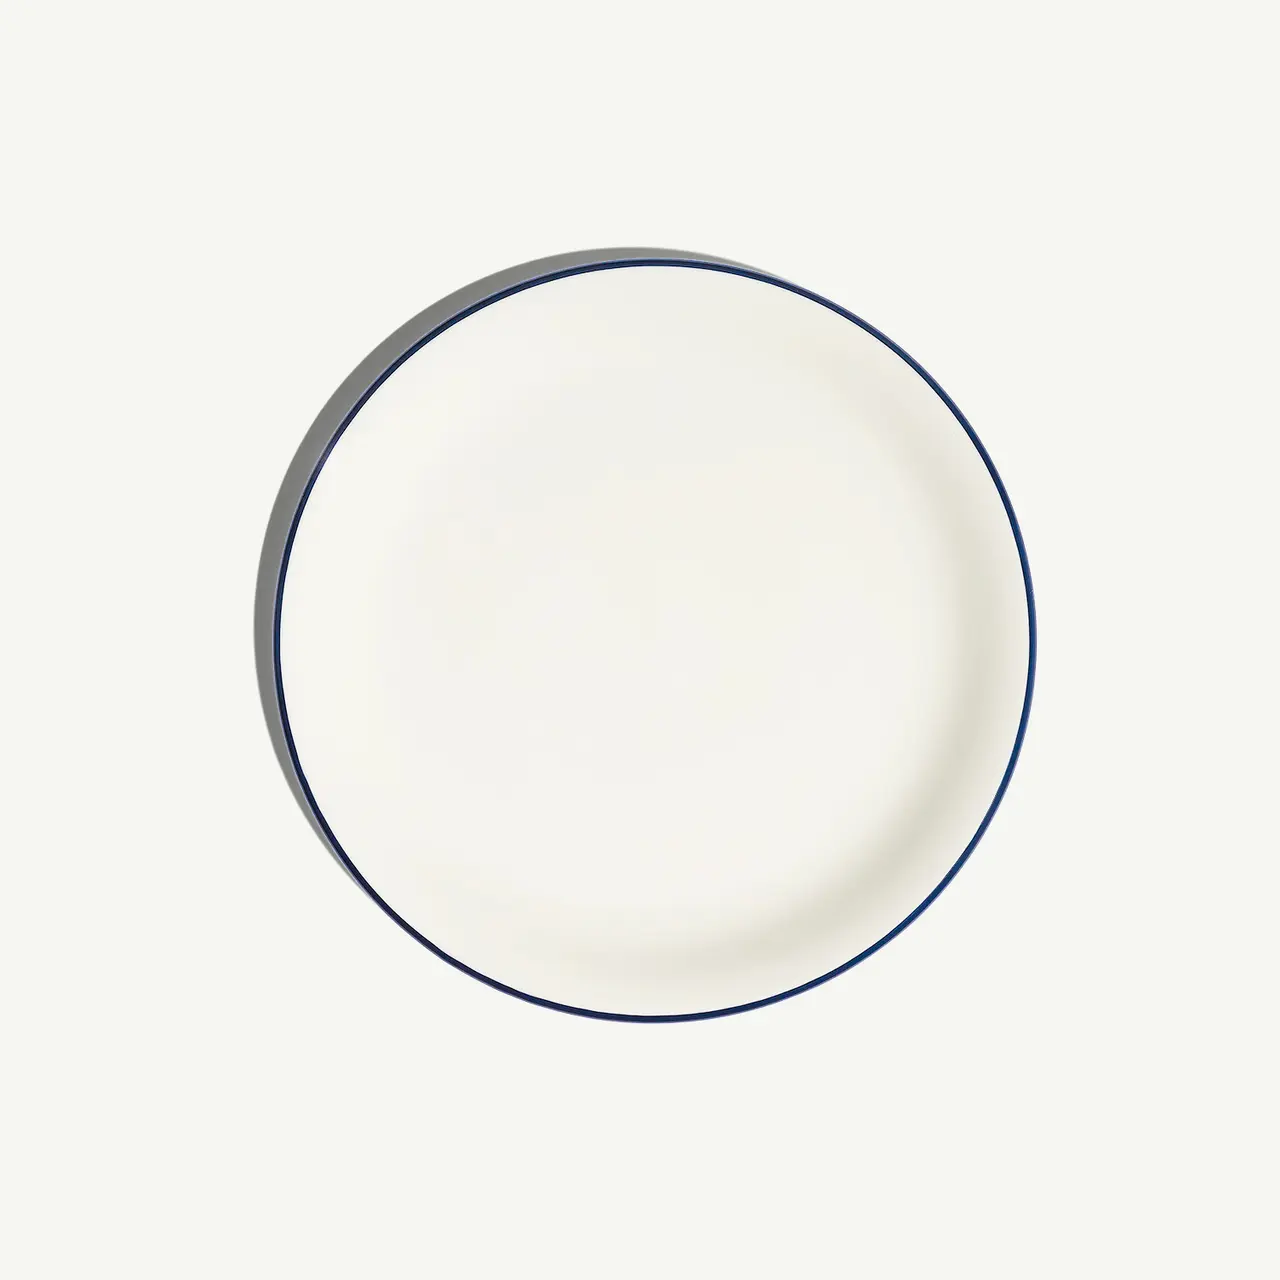 A blank white plate with a blue rim is centered on a light background.